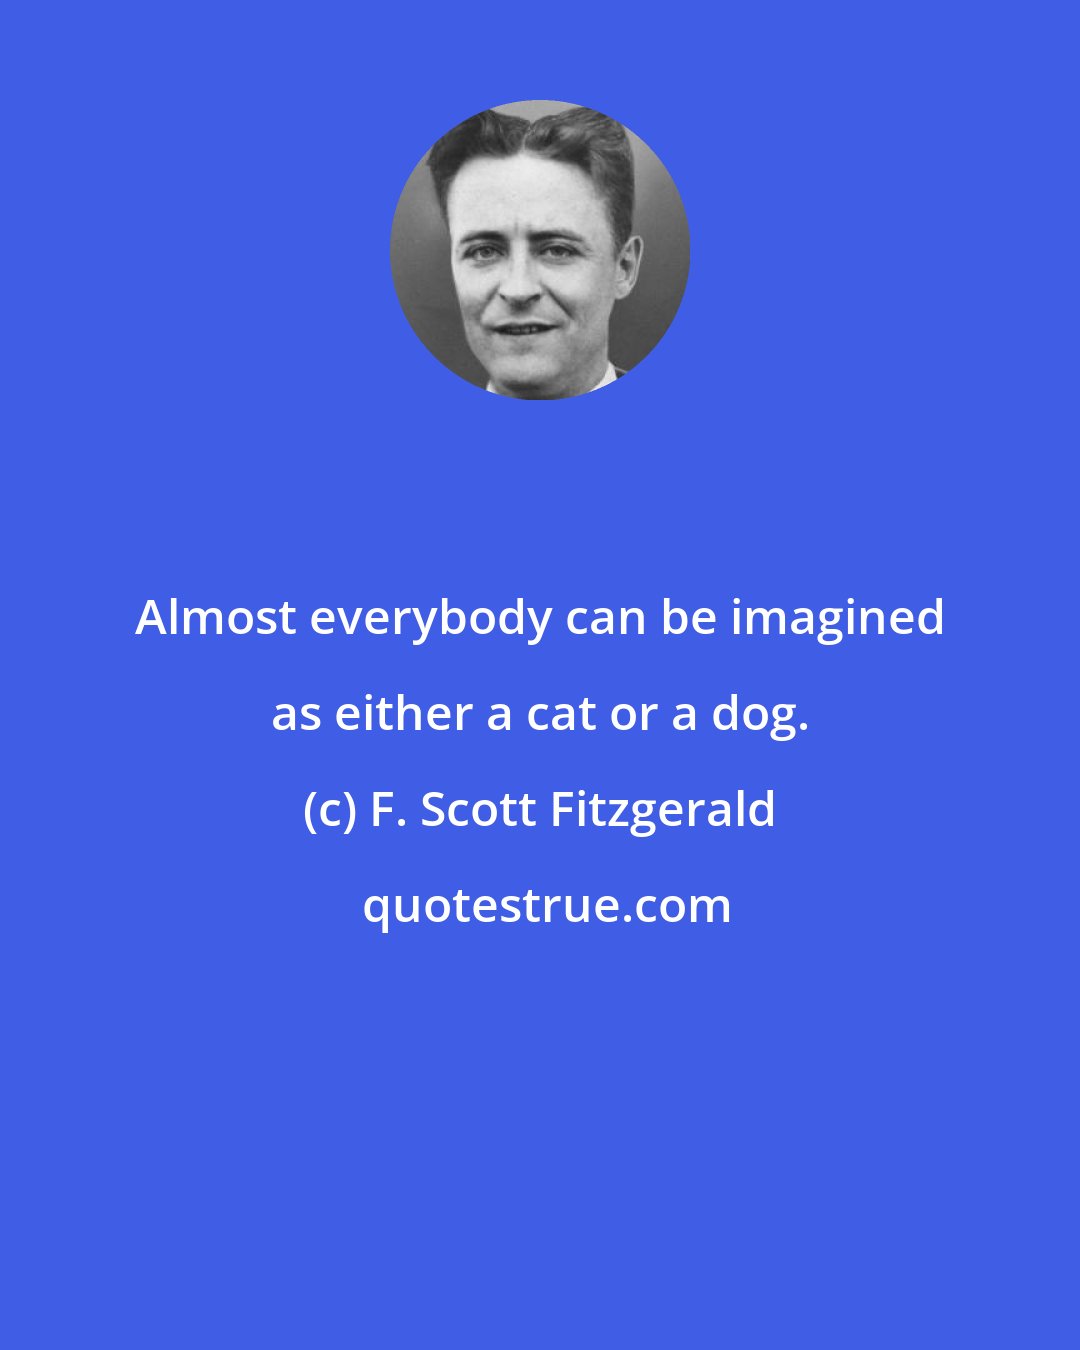 F. Scott Fitzgerald: Almost everybody can be imagined as either a cat or a dog.